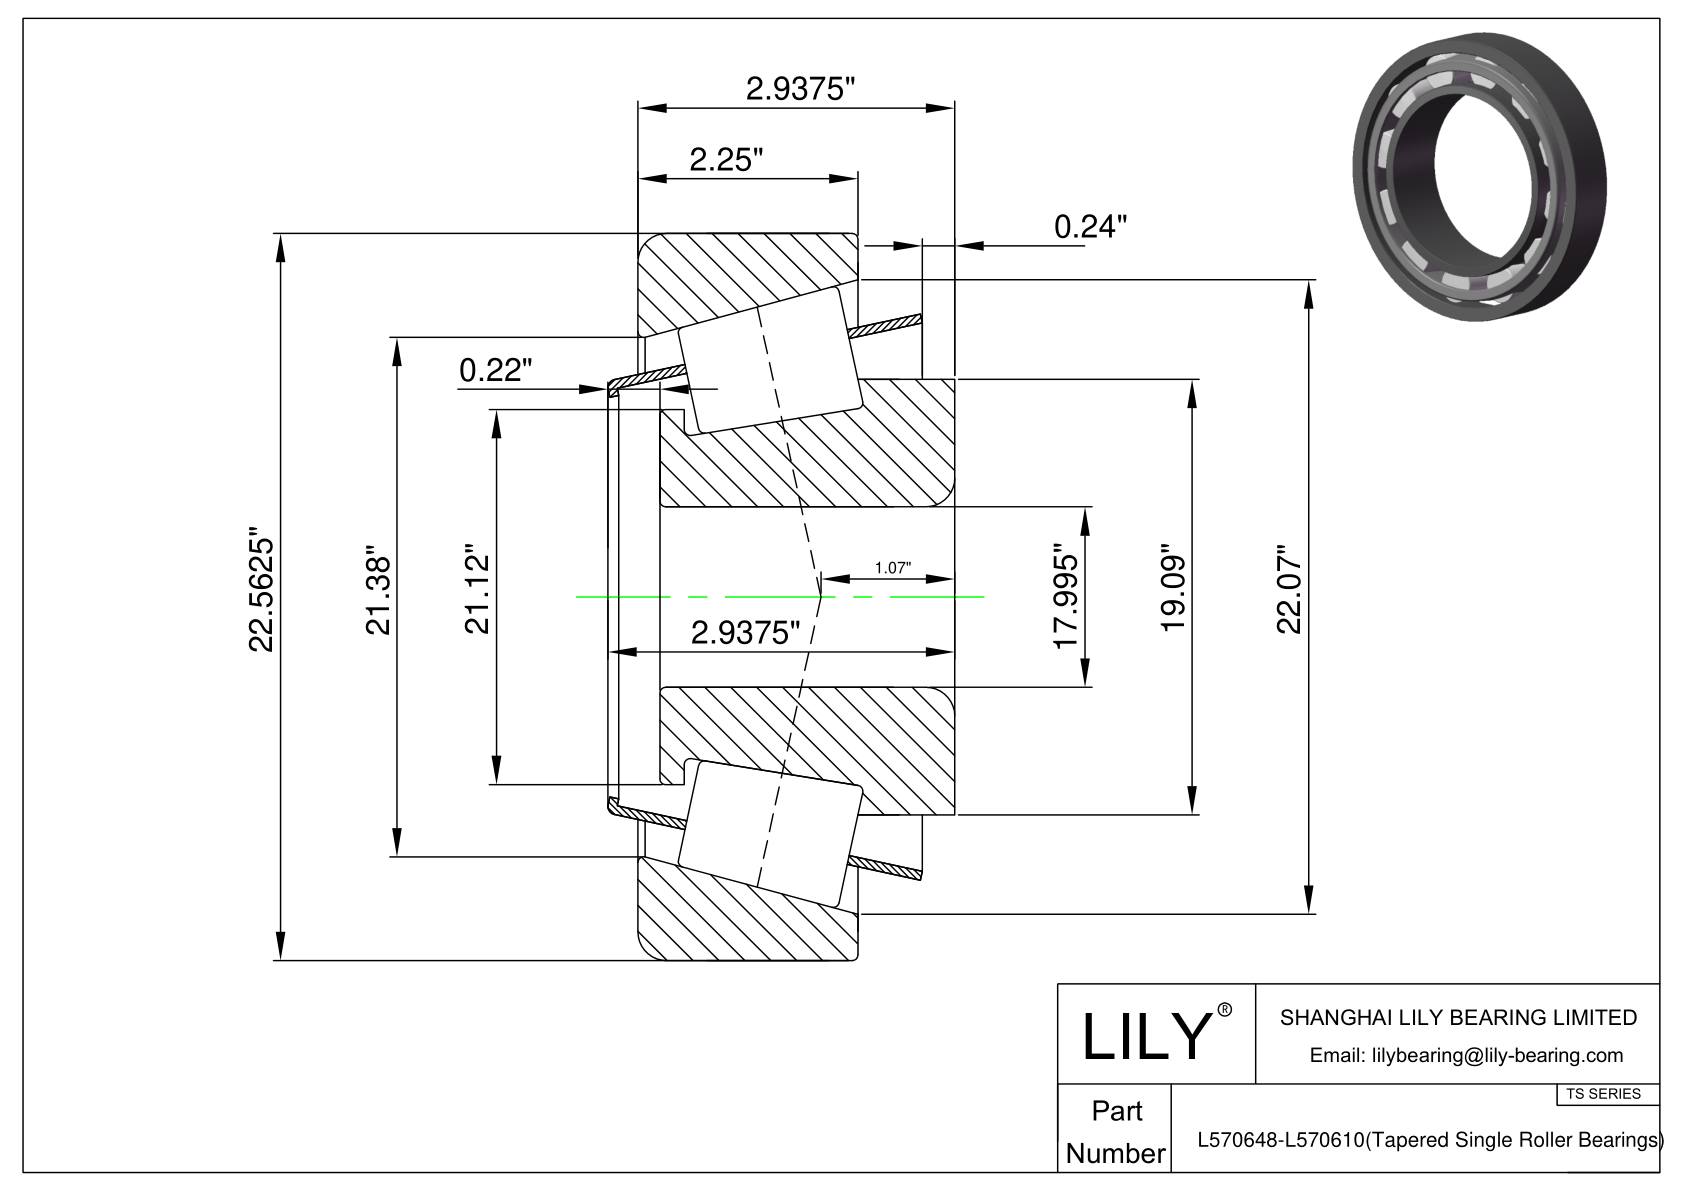 L570648-L570610 TS (Tapered Single Roller Bearings) (Imperial) cad drawing